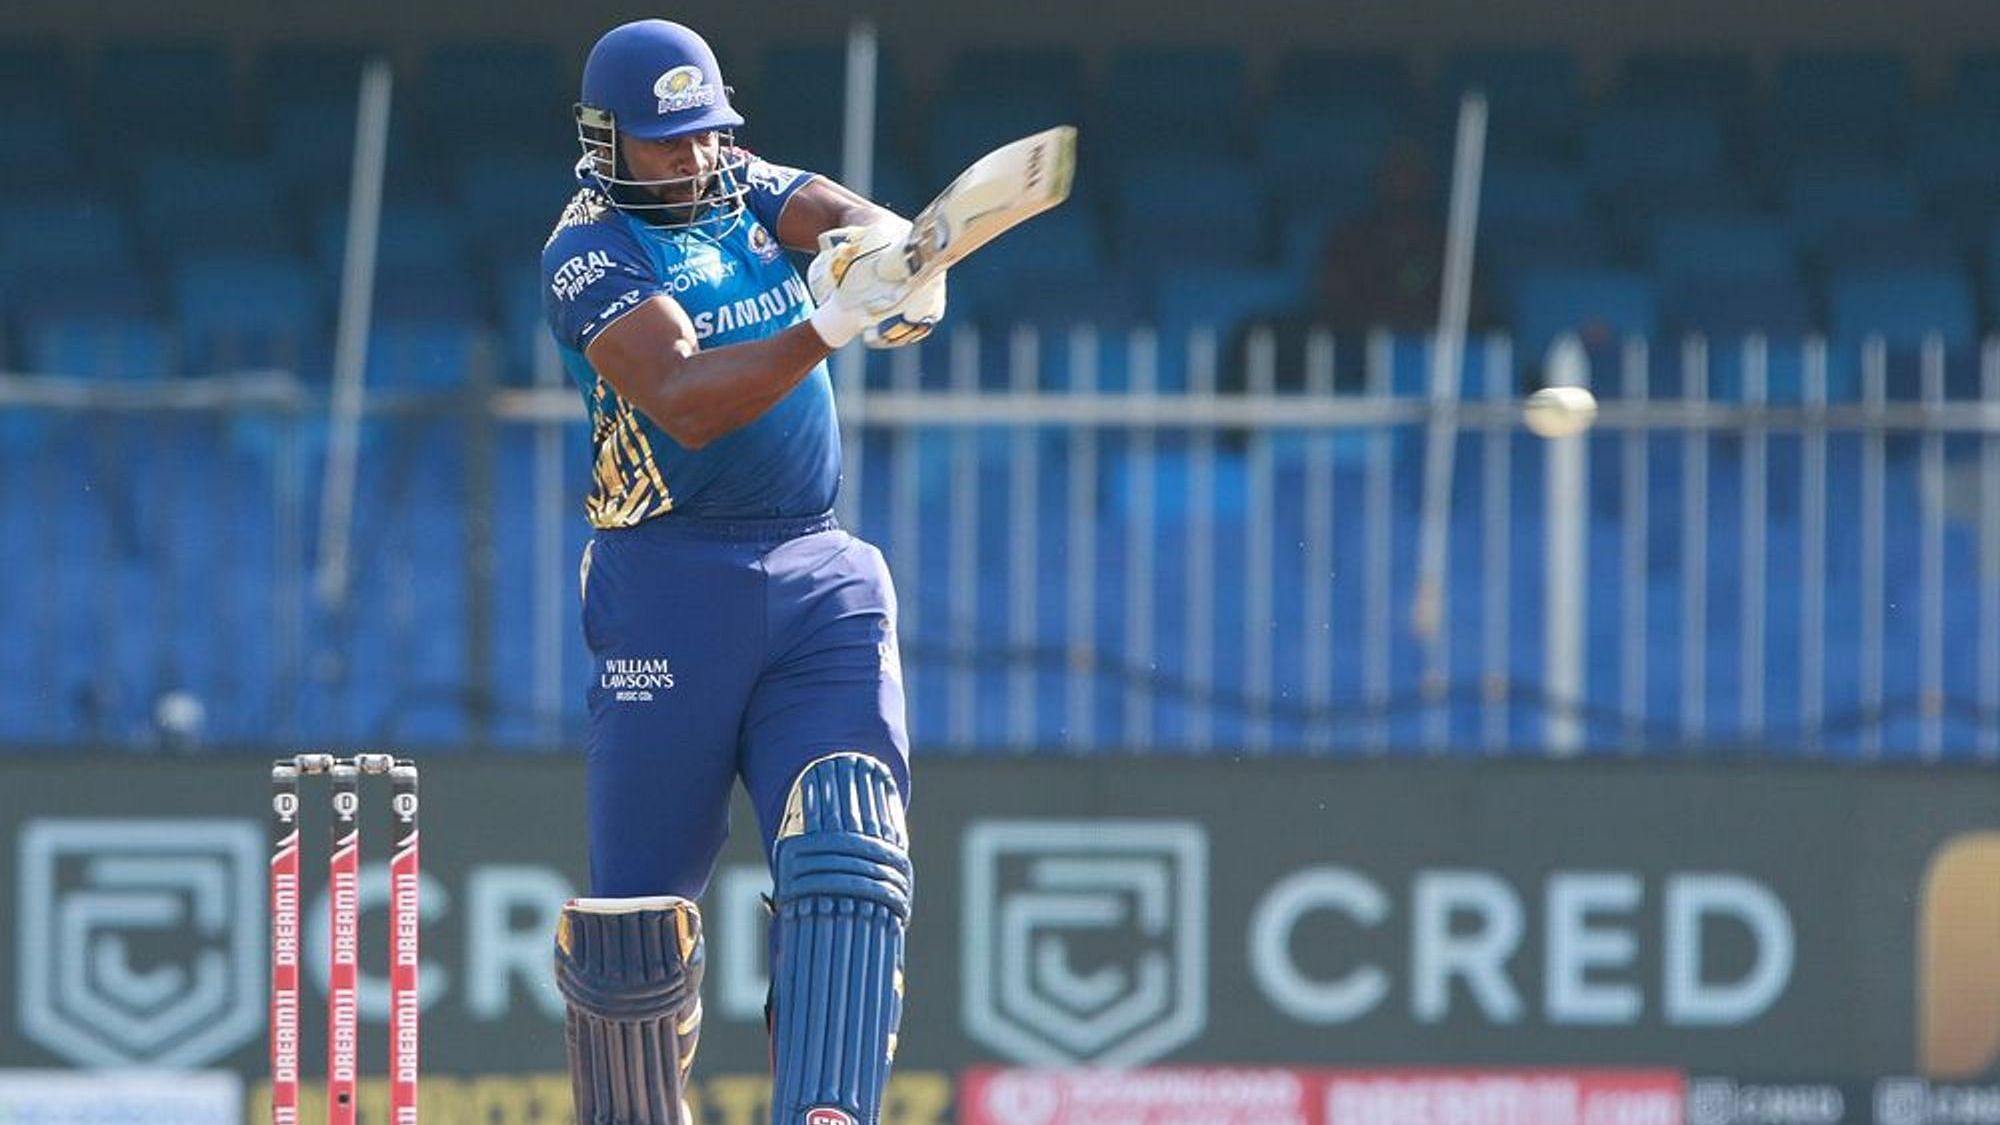 Mumbai Indians all-rounder Kieron Pollard has been in scintillating hitting form and continues to do so for his side